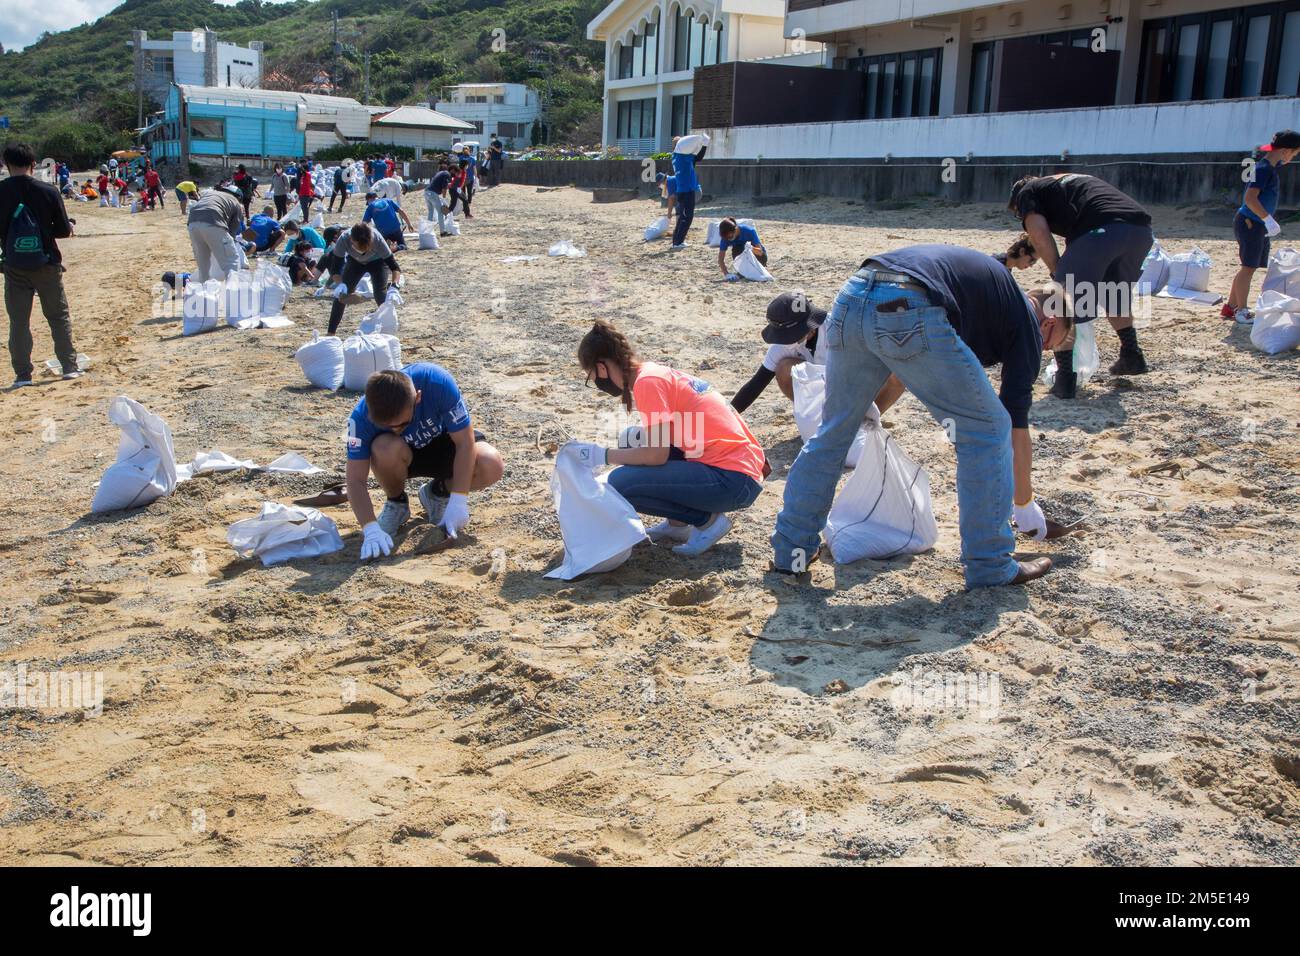 Single Marine Program members experience pumice stone removal for the first time at Kuraha Beach, also known as Malibu beach, in Onna village. Stock Photo